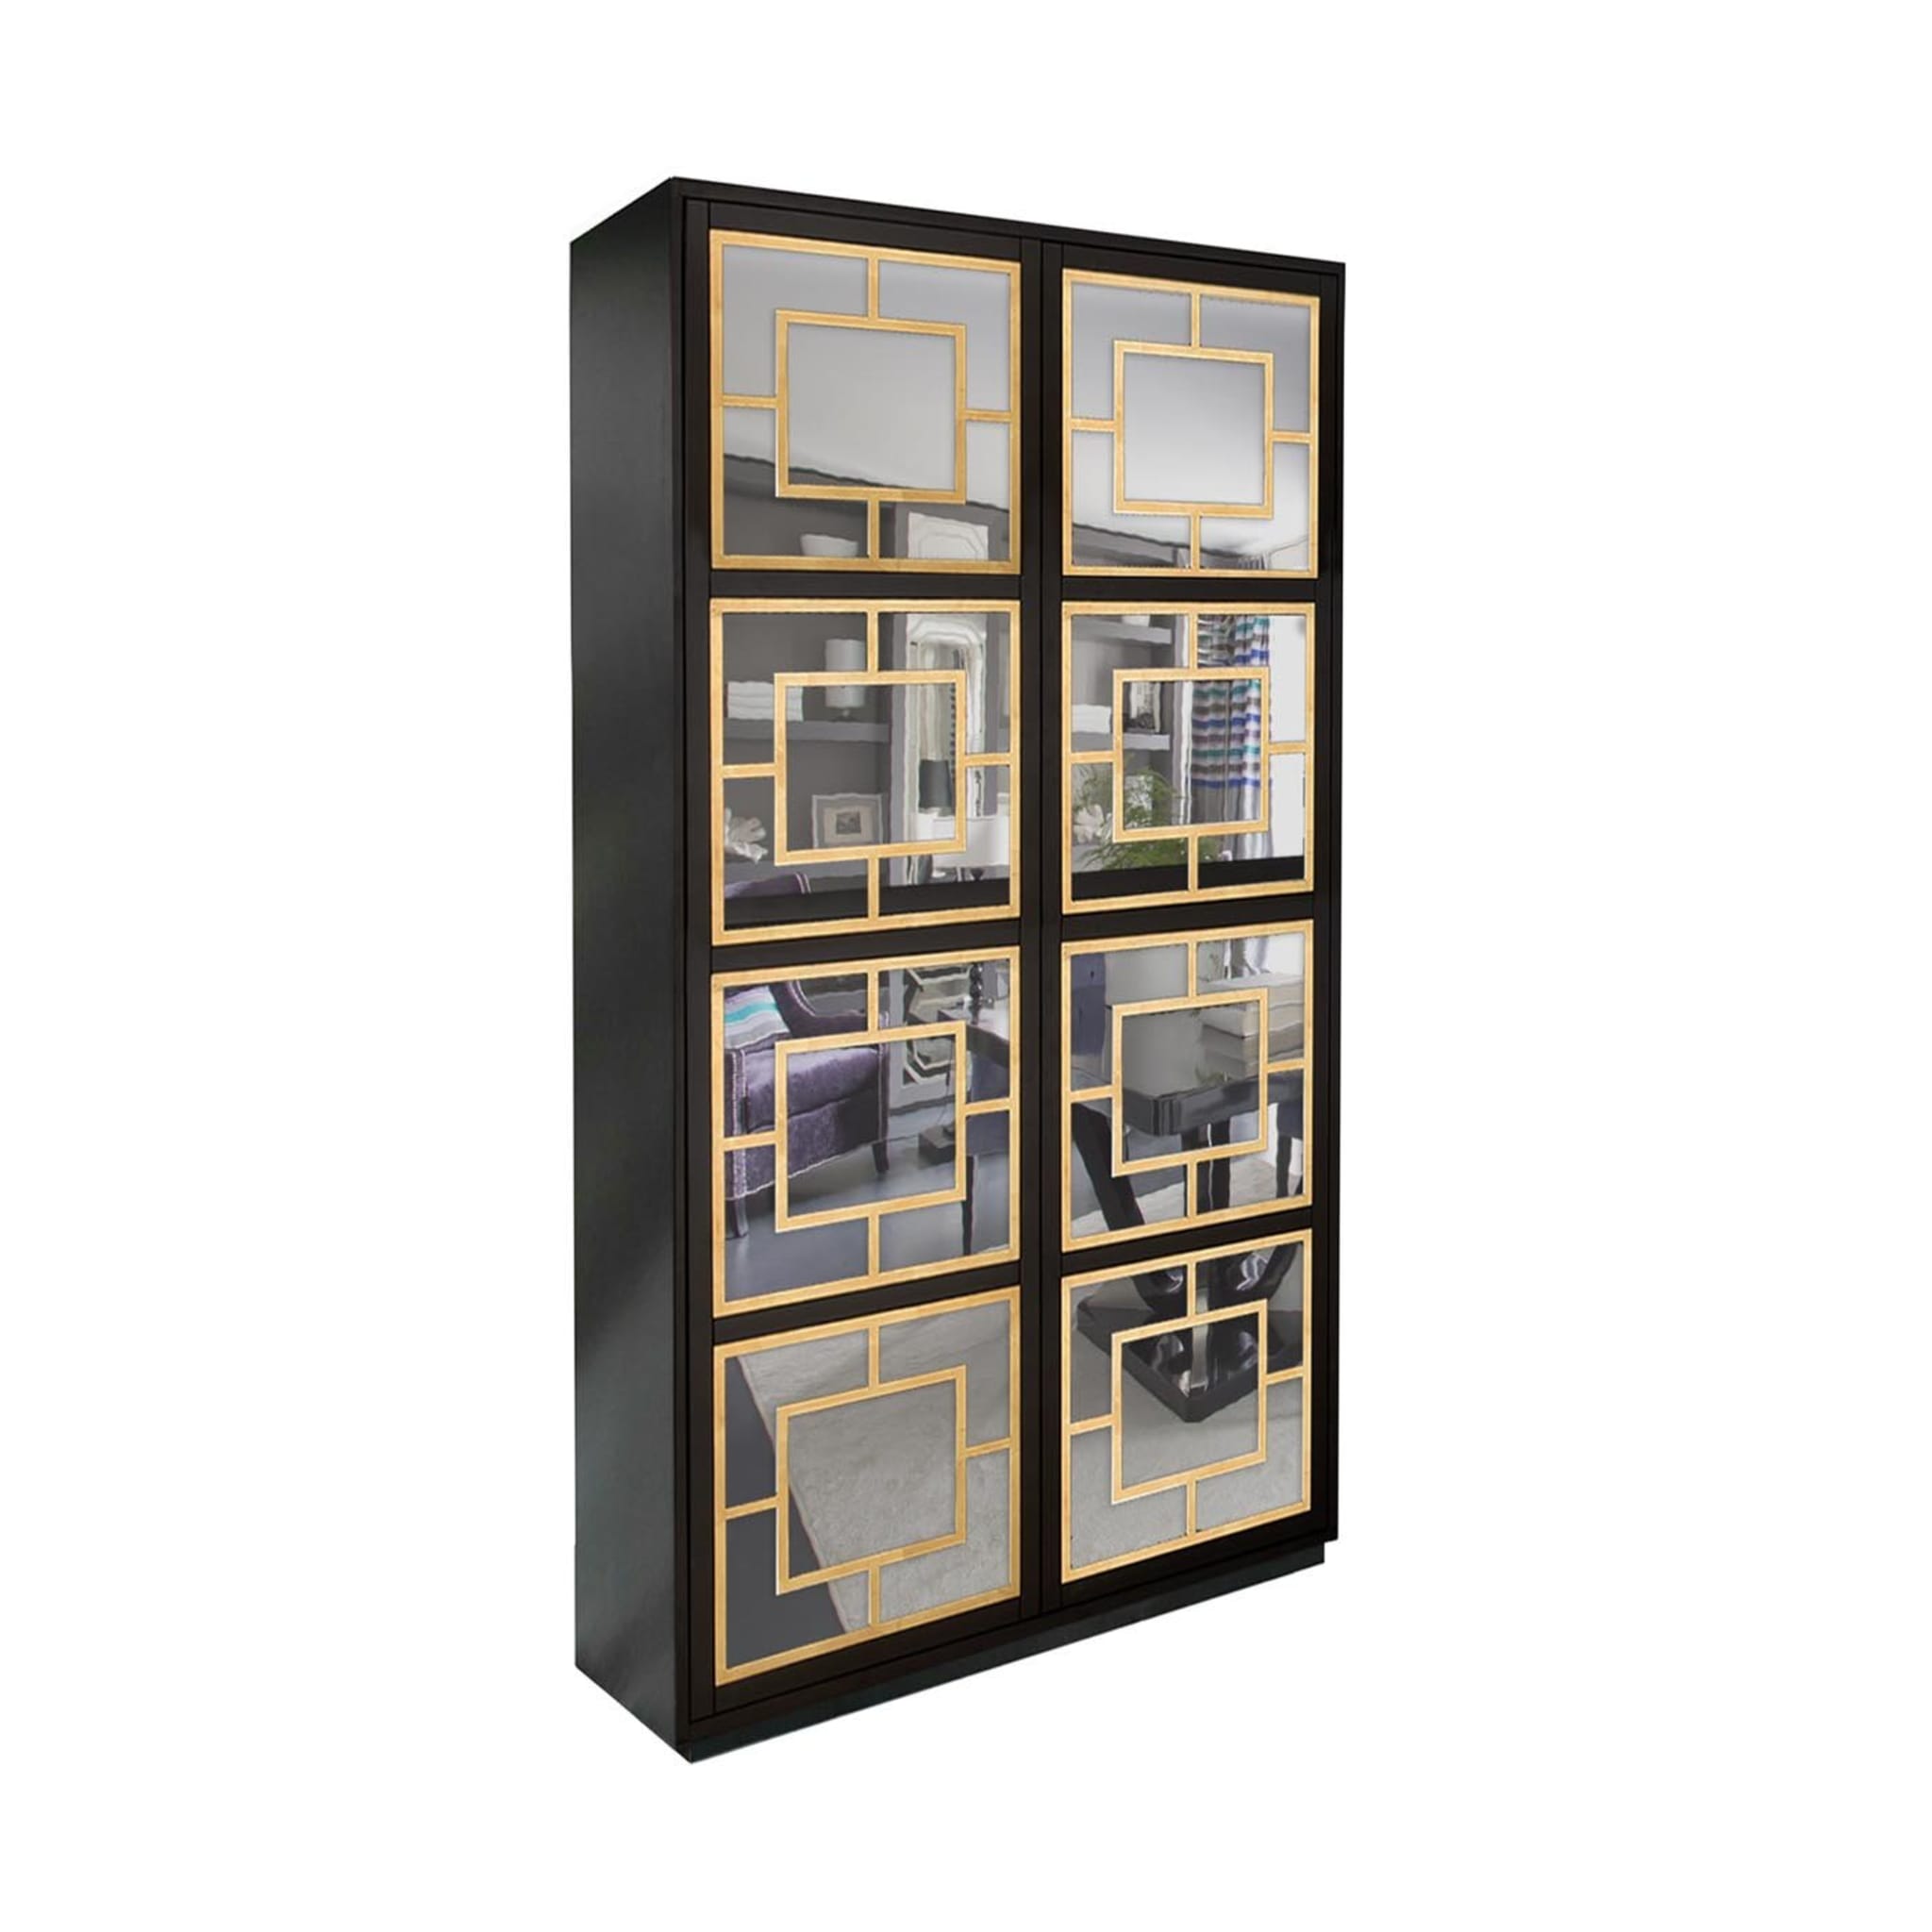 Zoe Armoire with Mirror and Plinth Base - Alternative view 1